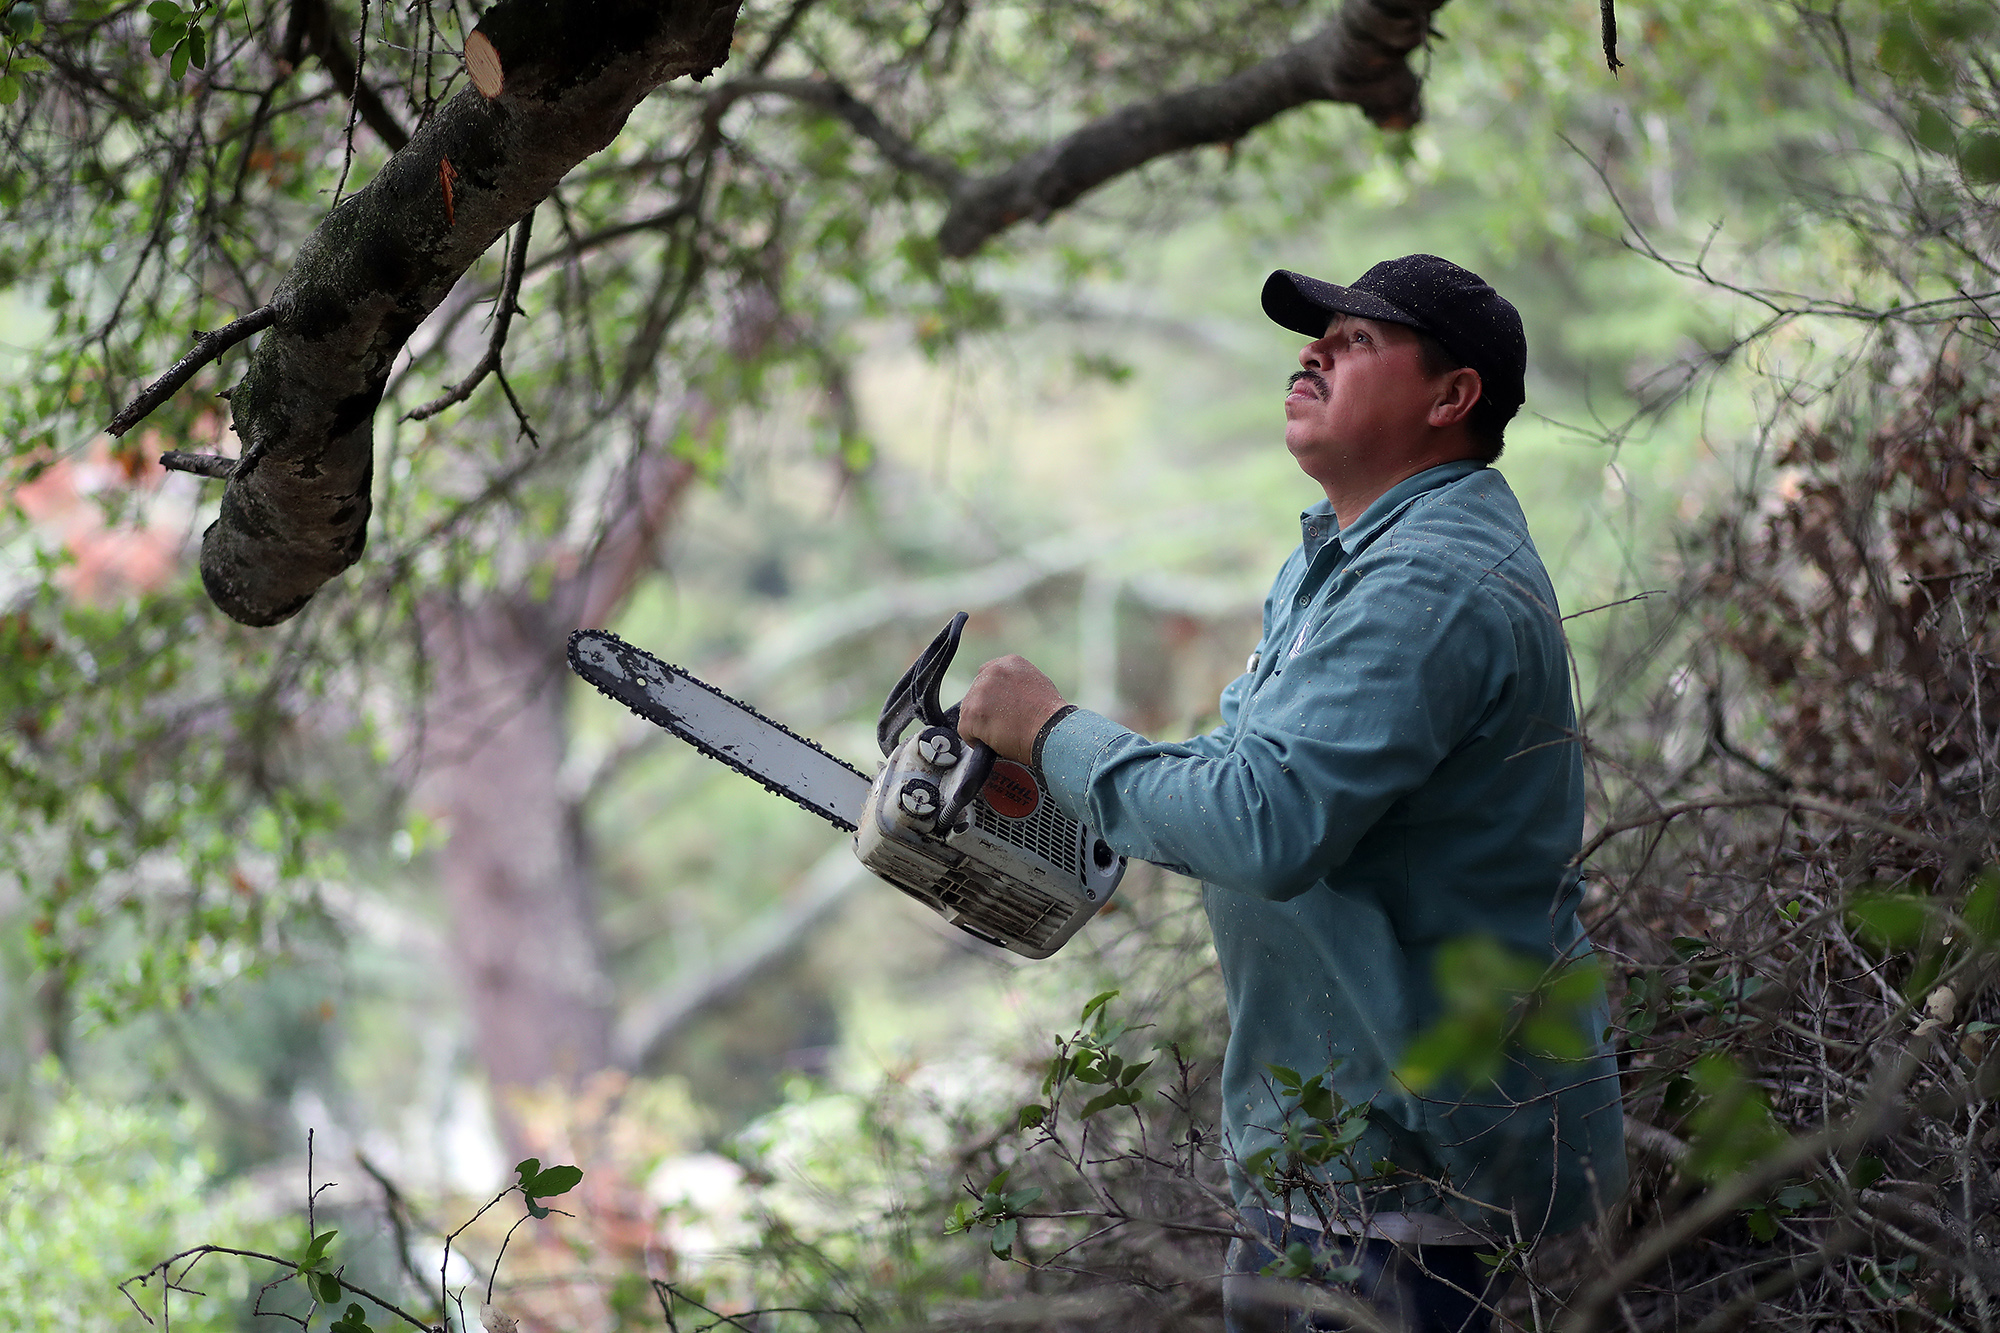 A man holds up a chainsaw in the outdoors and looks up at the canopy.